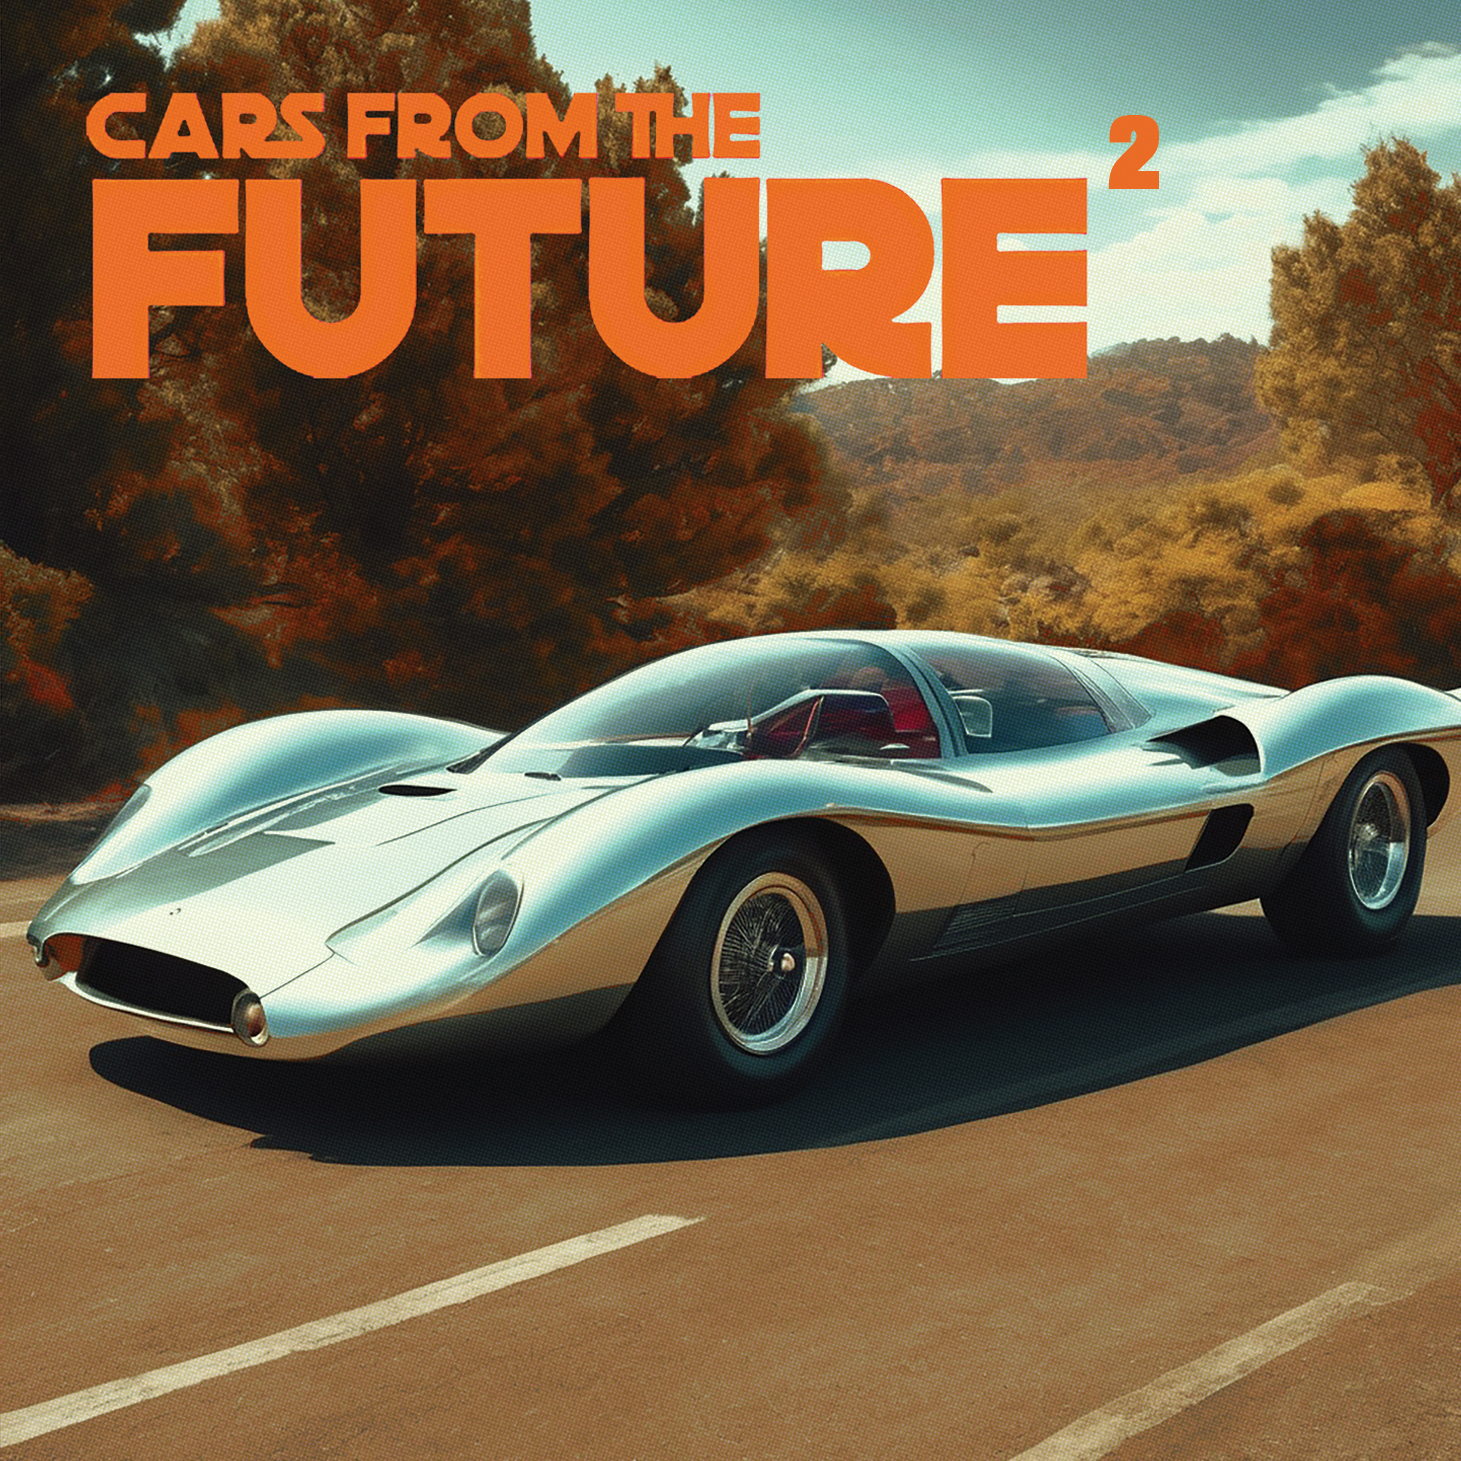 CARS FROM THE FUTURE – 2